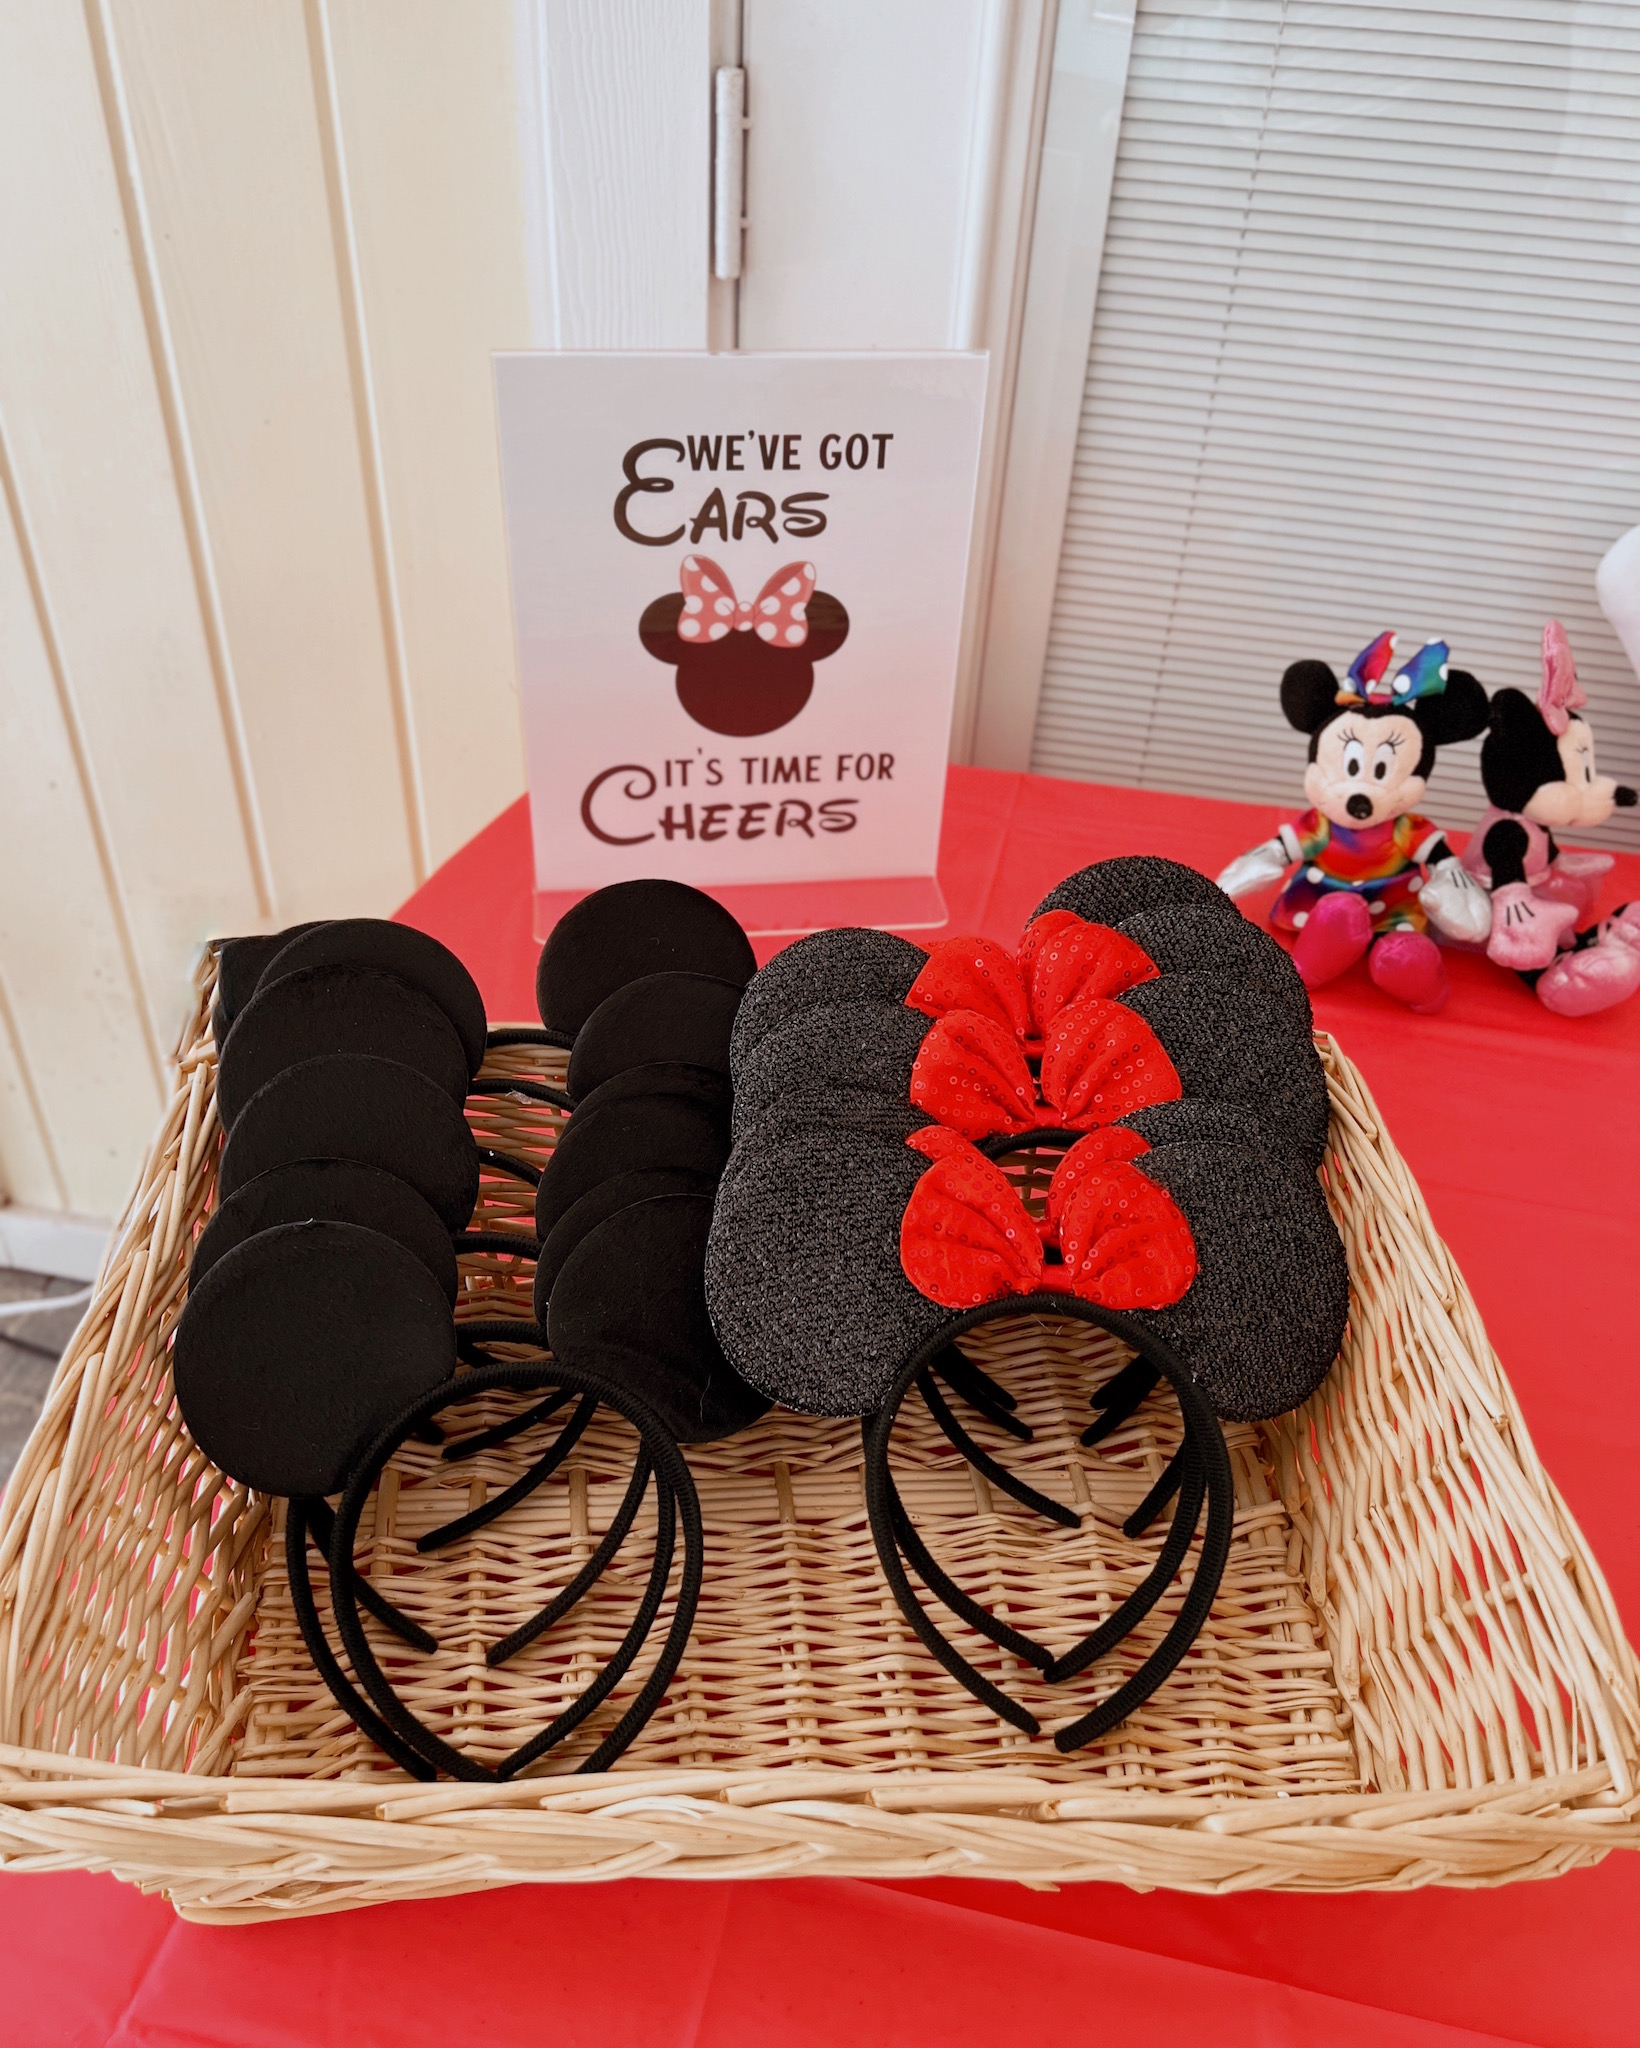 Mouse ear party favors at Pepper's Magical "Mickey & Minnie Mouse" 3rd Birthday Pool Party | Creative ideas for hosting a magical Mickey & Minnie themed birthday bash for your little Mouseketeer with do-able decor, punny snacks, and party games that are fun for all ages! via thinkingcloset.com